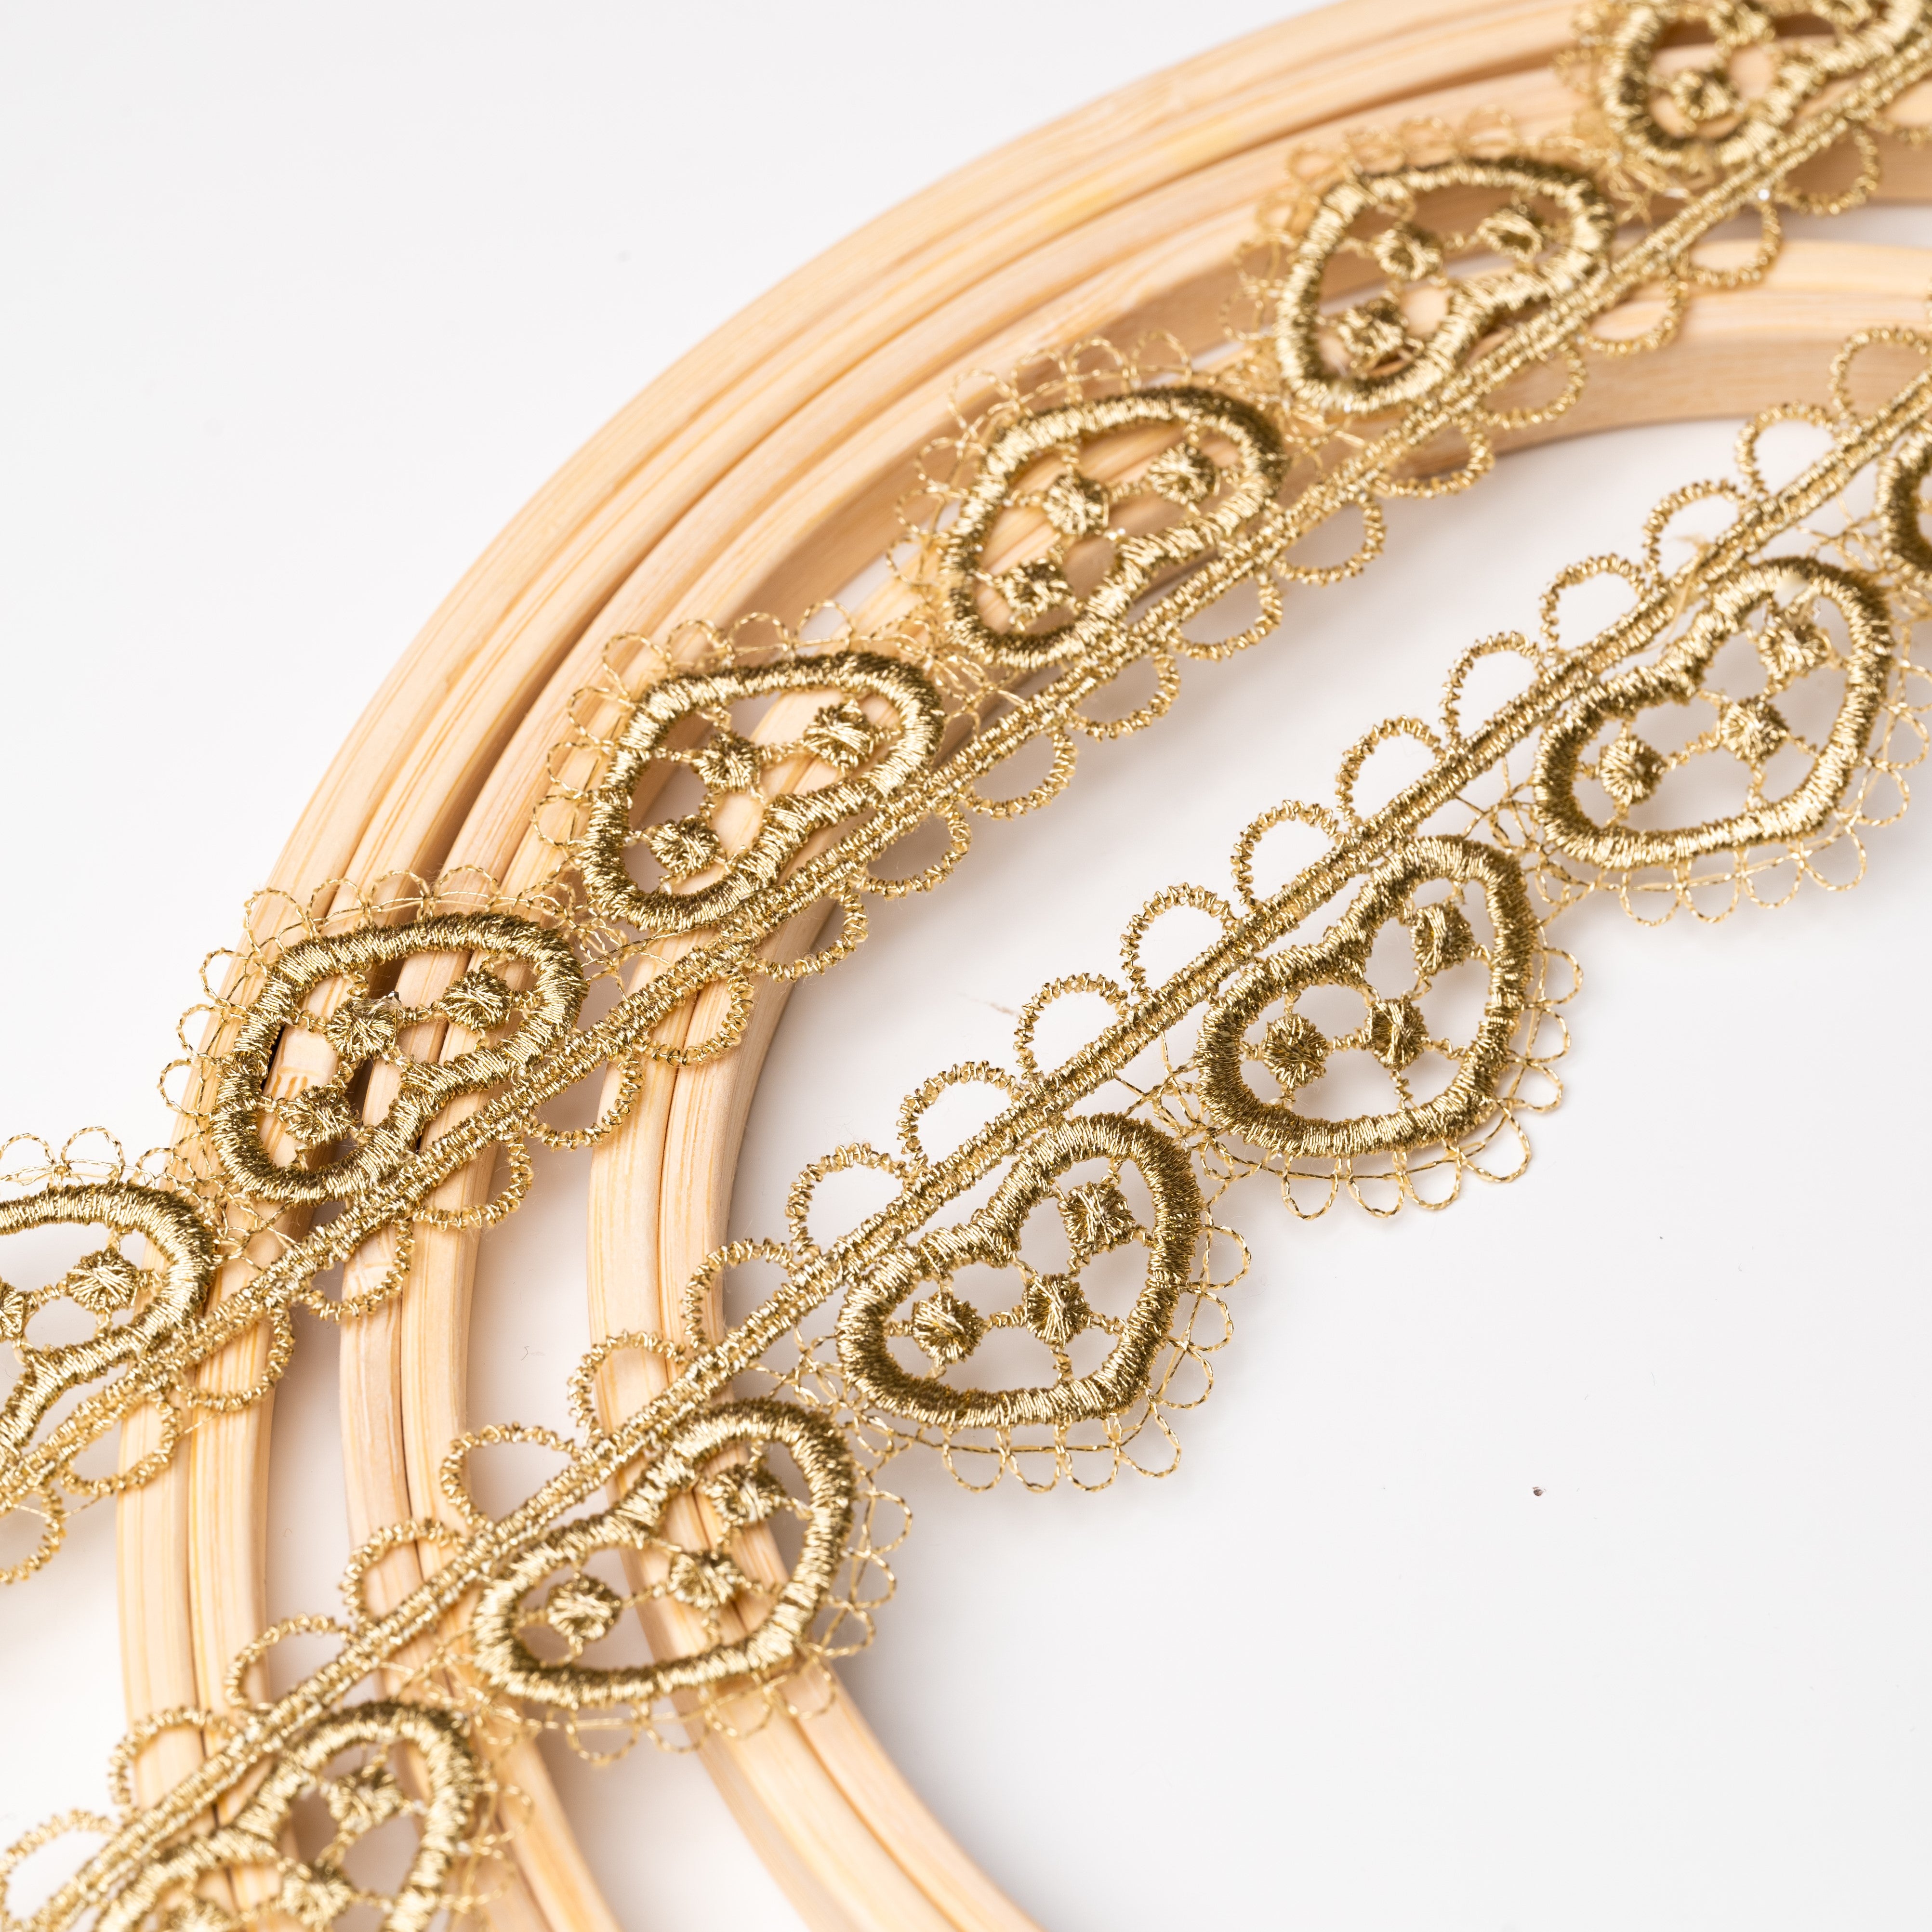 Delicate antique old gold trim with heart shaped motifs.  The trim is displayed on an embroidery ring.